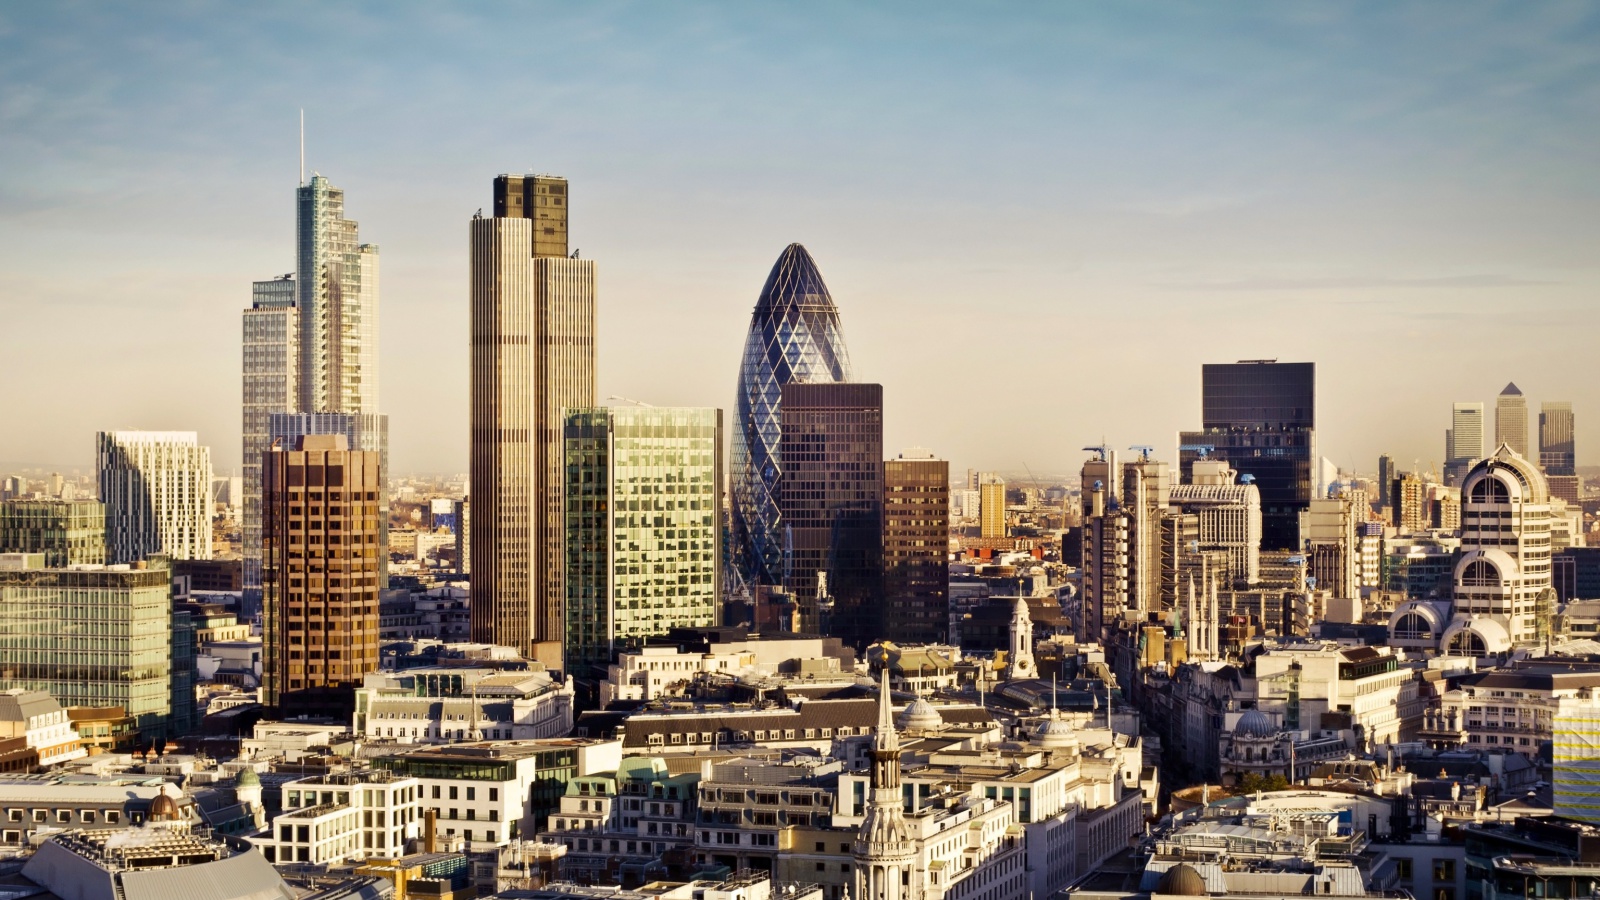 Das London Skyscraper District with 30 St Mary Axe Wallpaper 1600x900